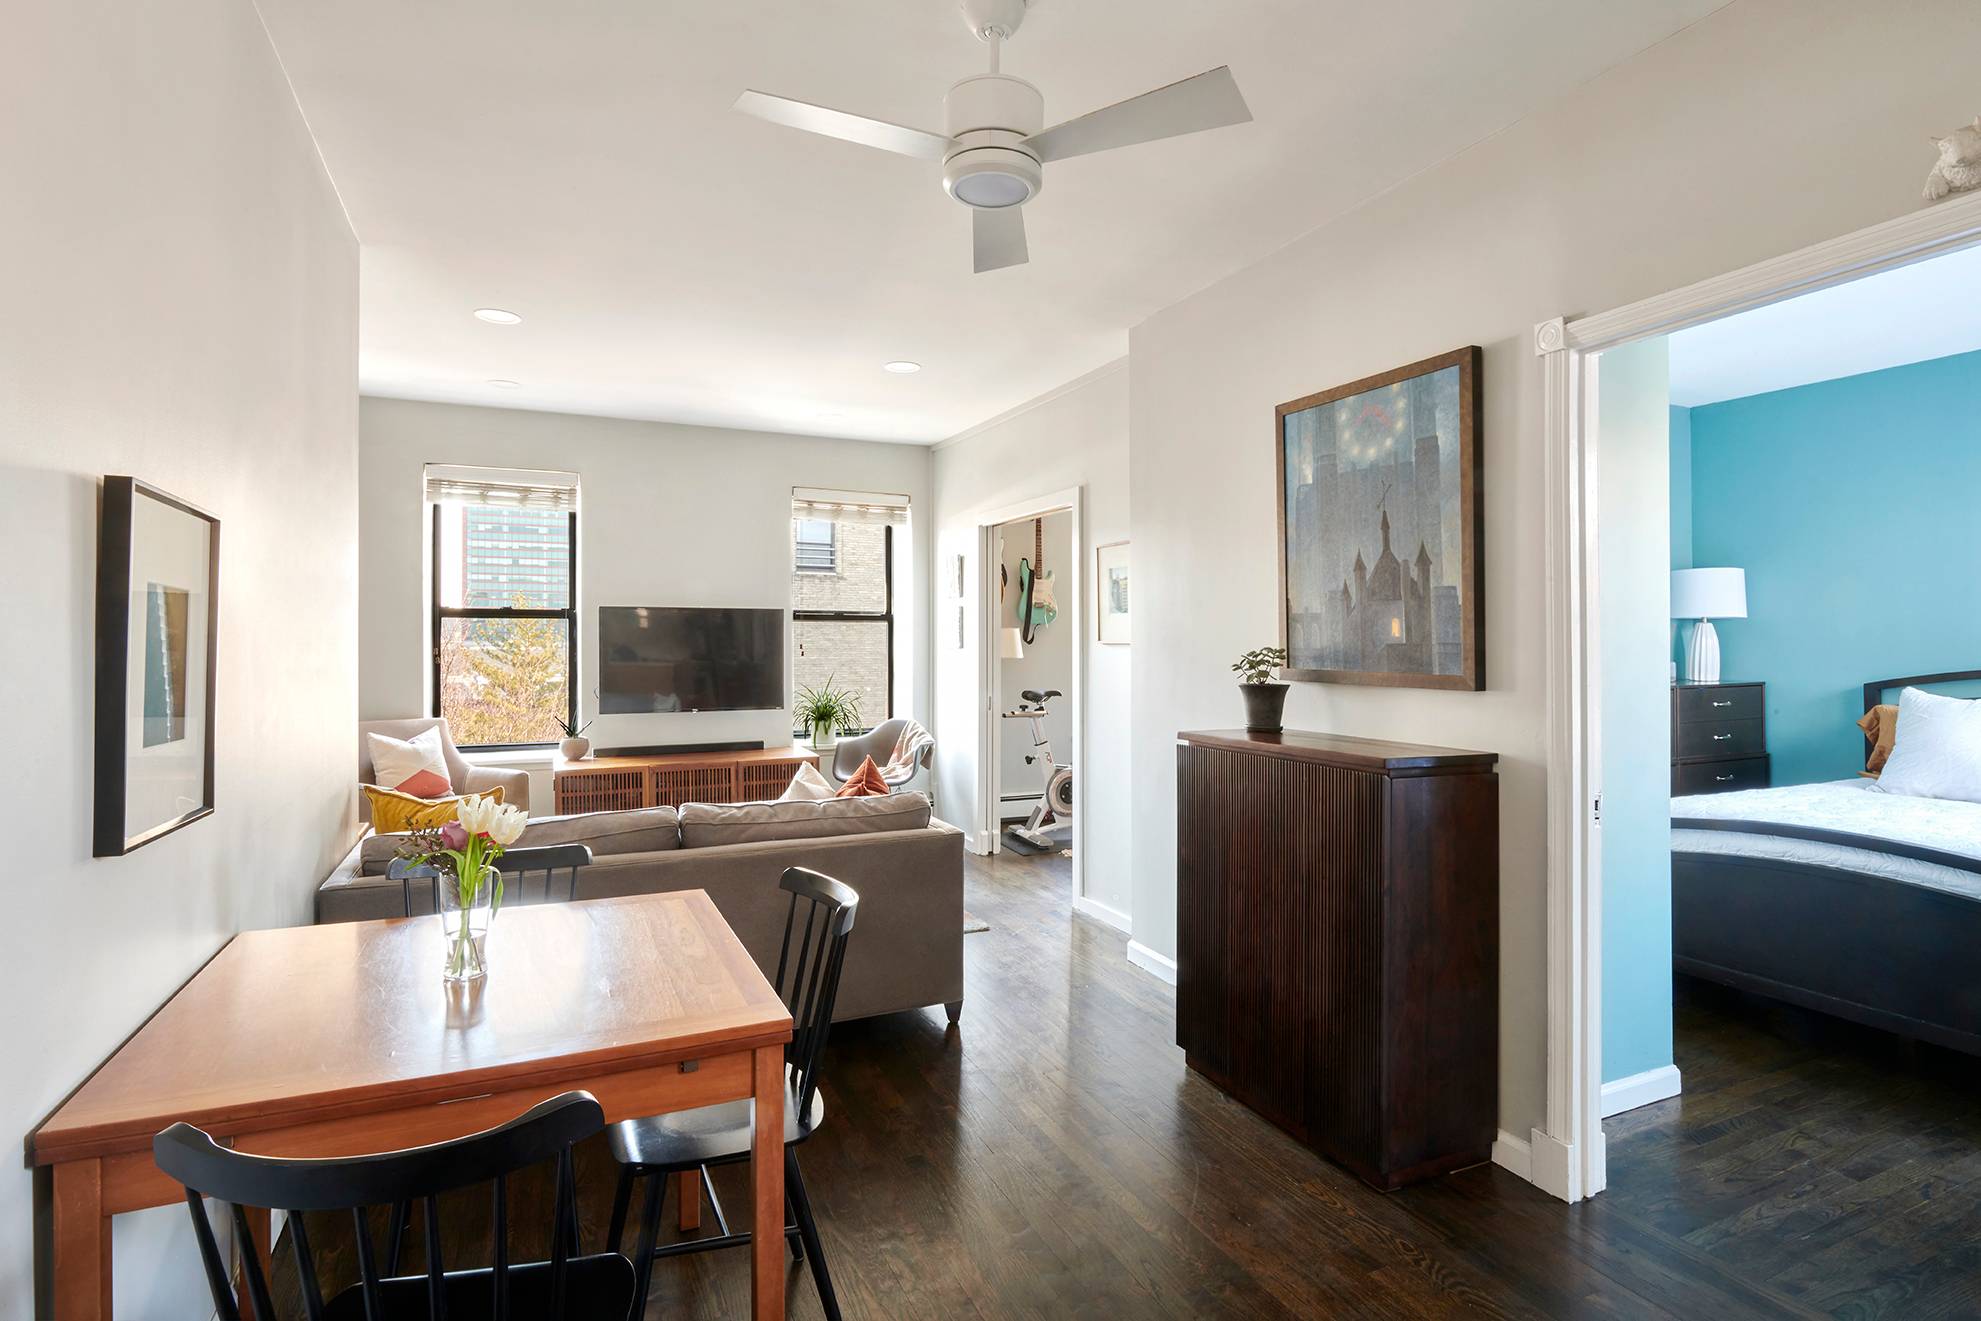 Welcome home to this beautifully renovated, bright and airy penthouse two bedroom one bathroom in the heart of Fort Greene on South Oxford Street.